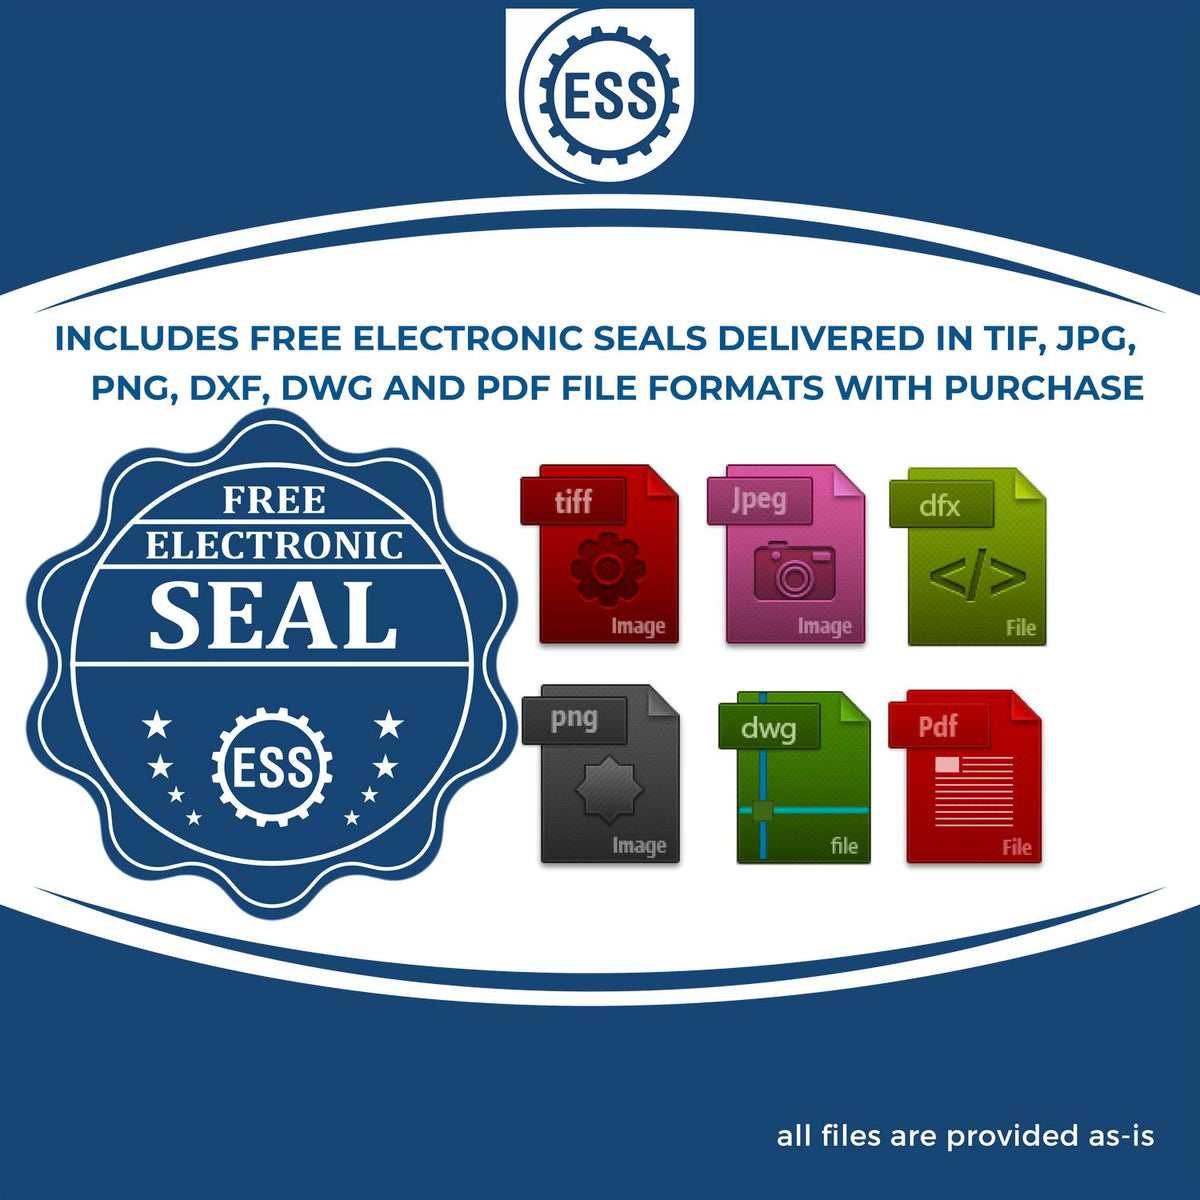 An infographic for the free electronic seal for the Premium MaxLight Pre-Inked Oklahoma Landscape Architectural Stamp illustrating the different file type icons such as DXF, DWG, TIF, JPG and PNG.